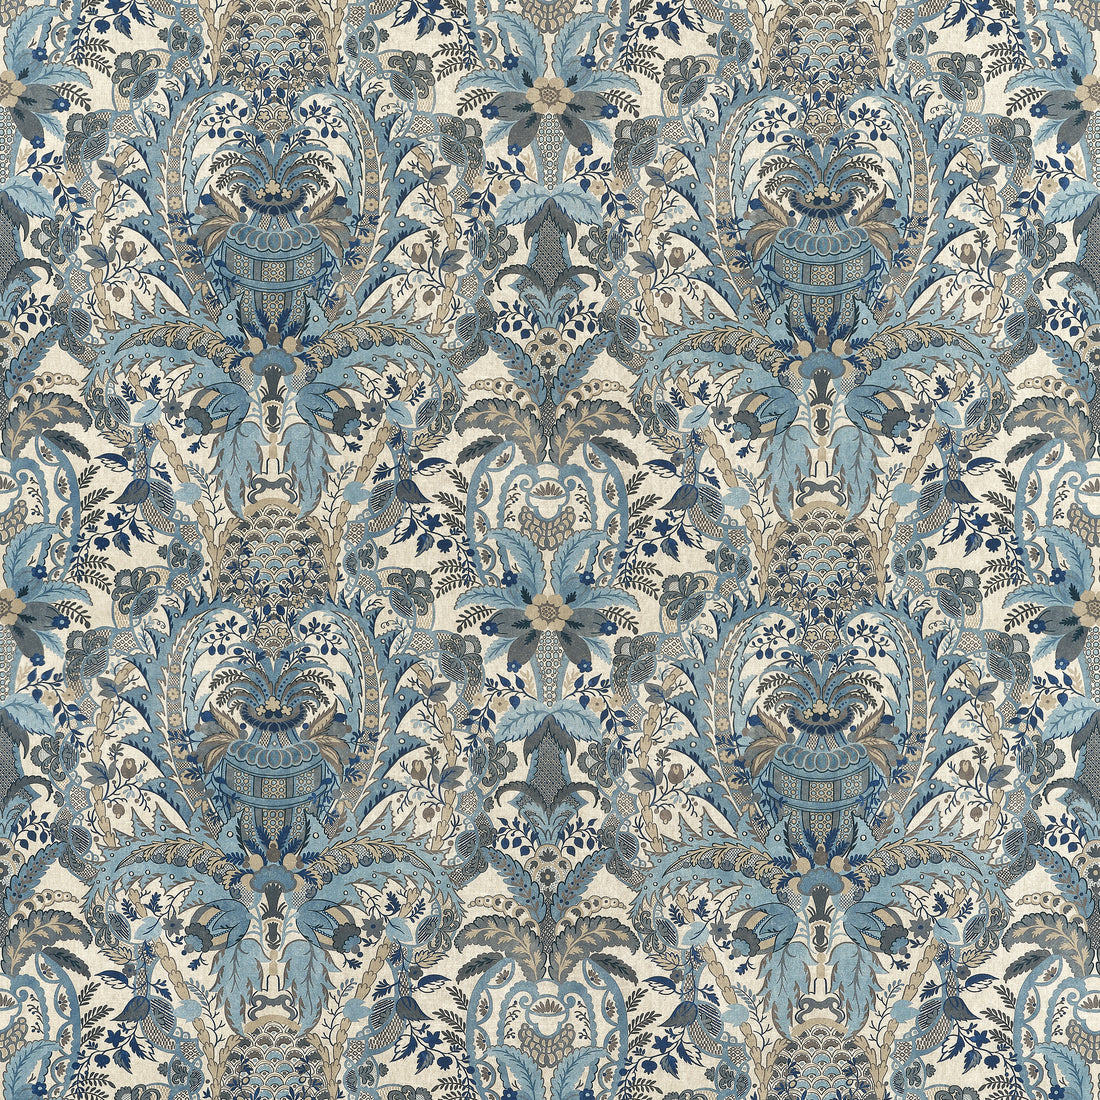 Narbeth fabric in slate and grey color - pattern number AF57862 - by Anna French in the Bristol collection